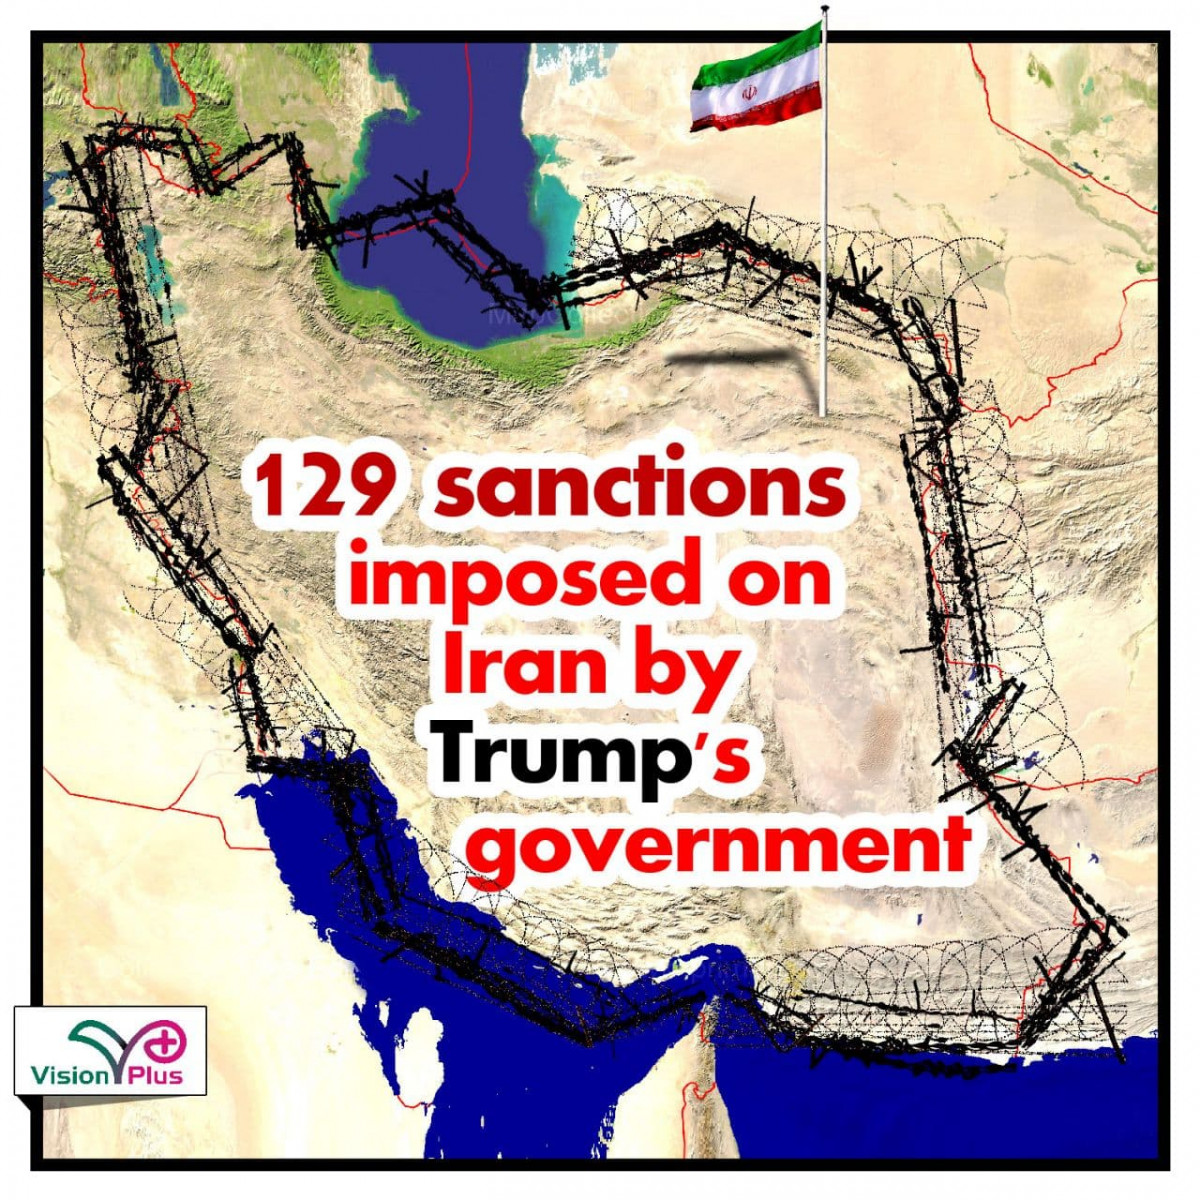 129 sanctions imposed on Iran by Trump's government